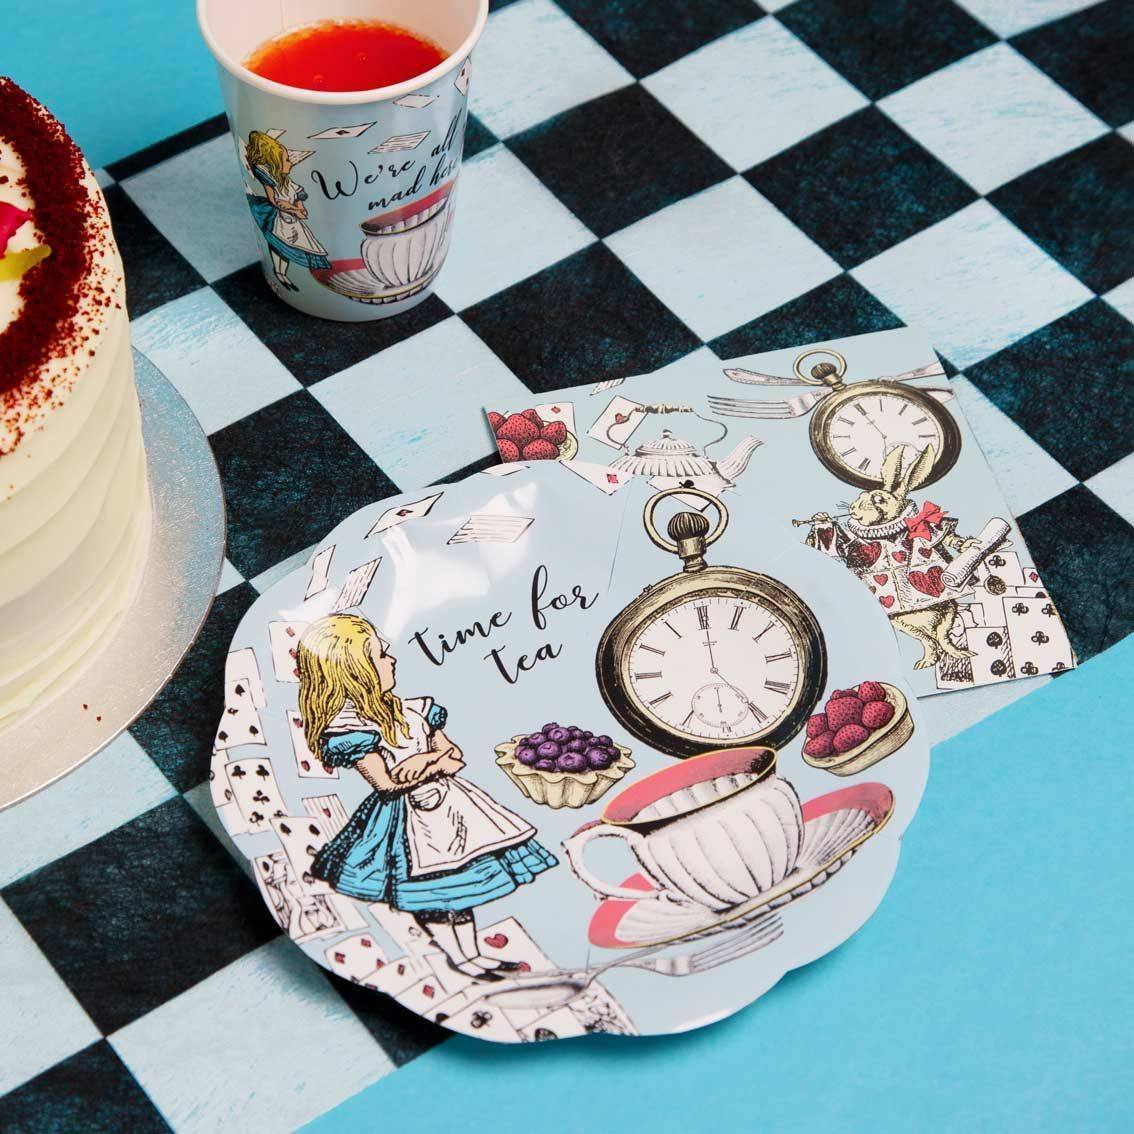 Alice in Wonderland Dessert Plates 12ct | The Party Darling